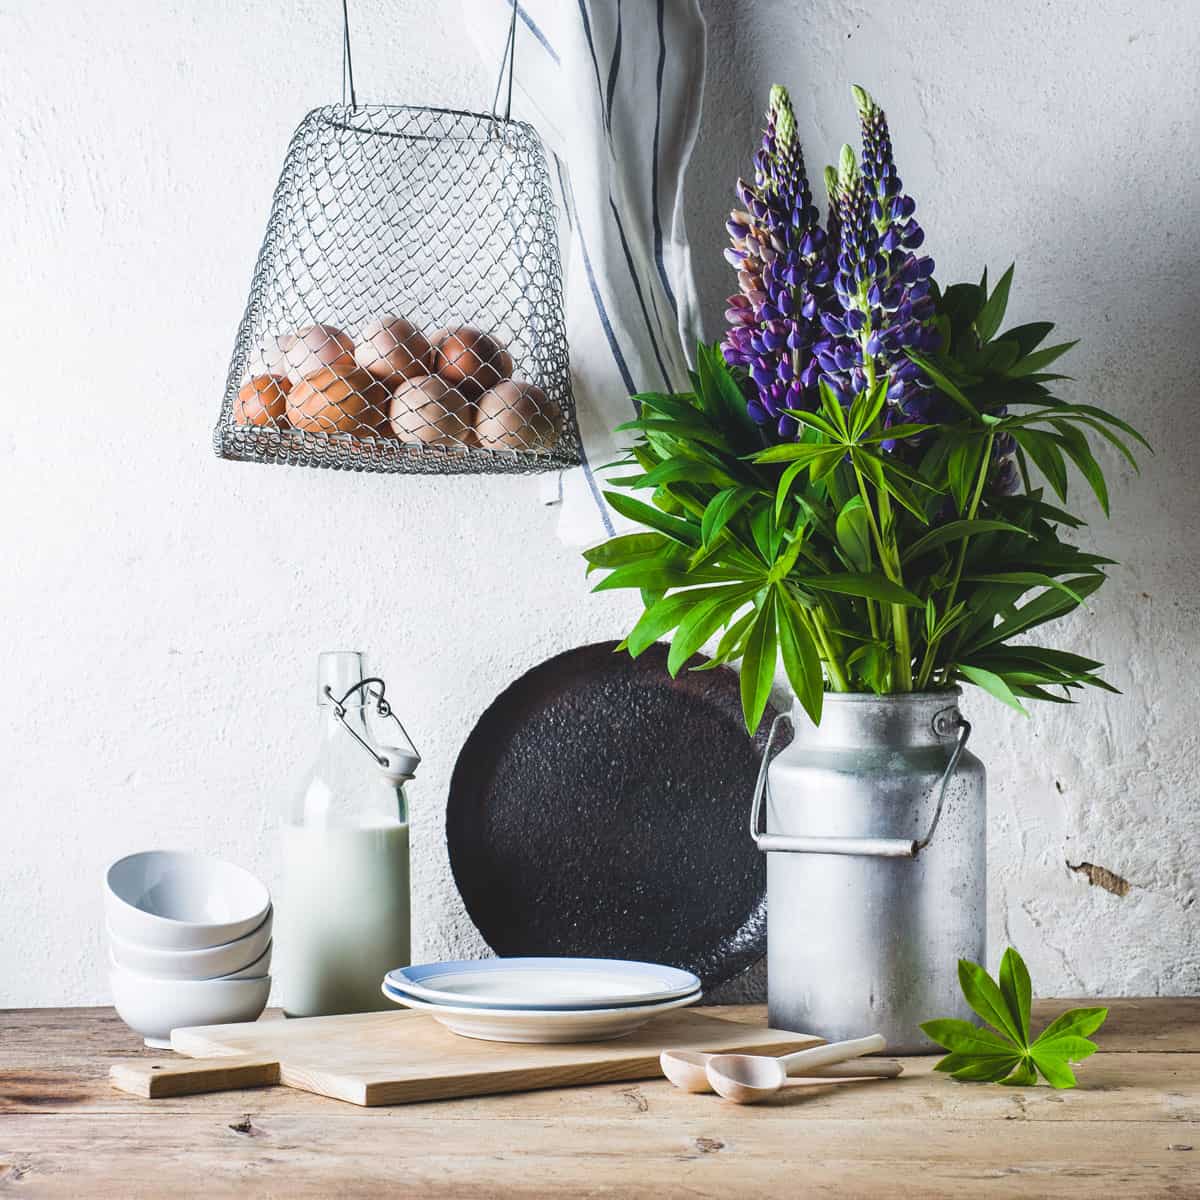 A kitchen counter with kitchen utensils and a small stainless pot with lupin flowers